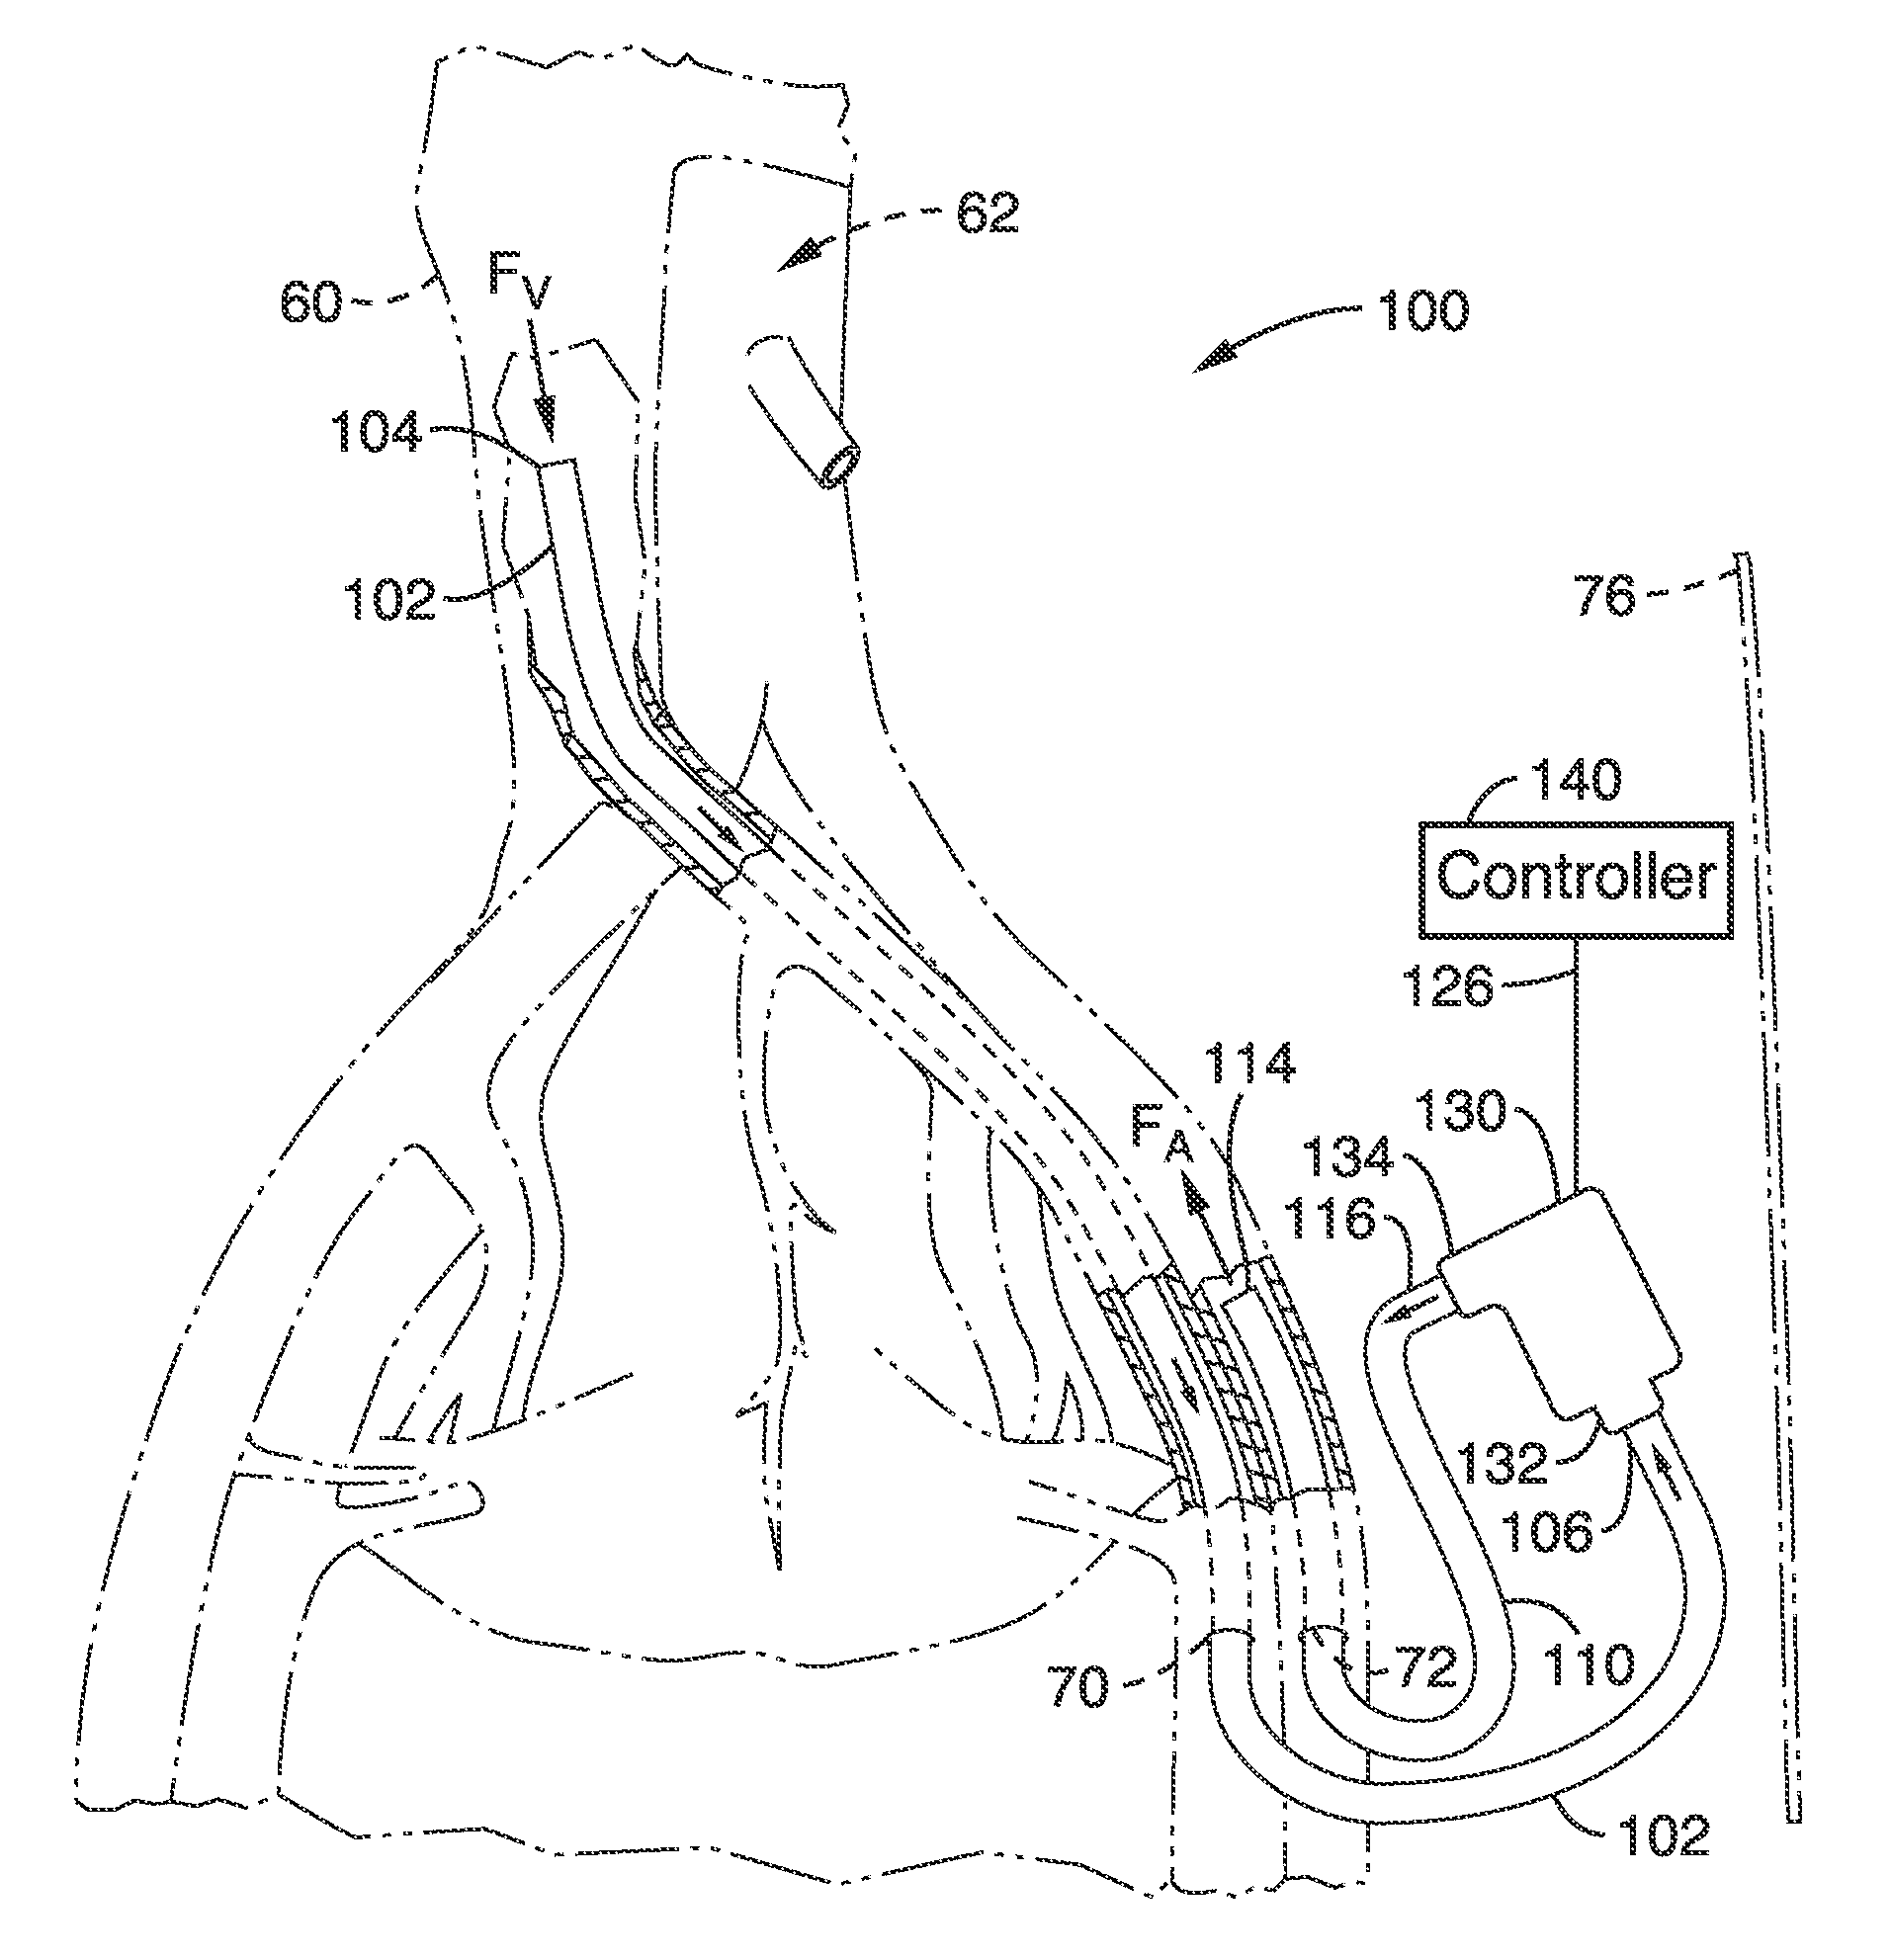 Methods and devices for treating heart failure